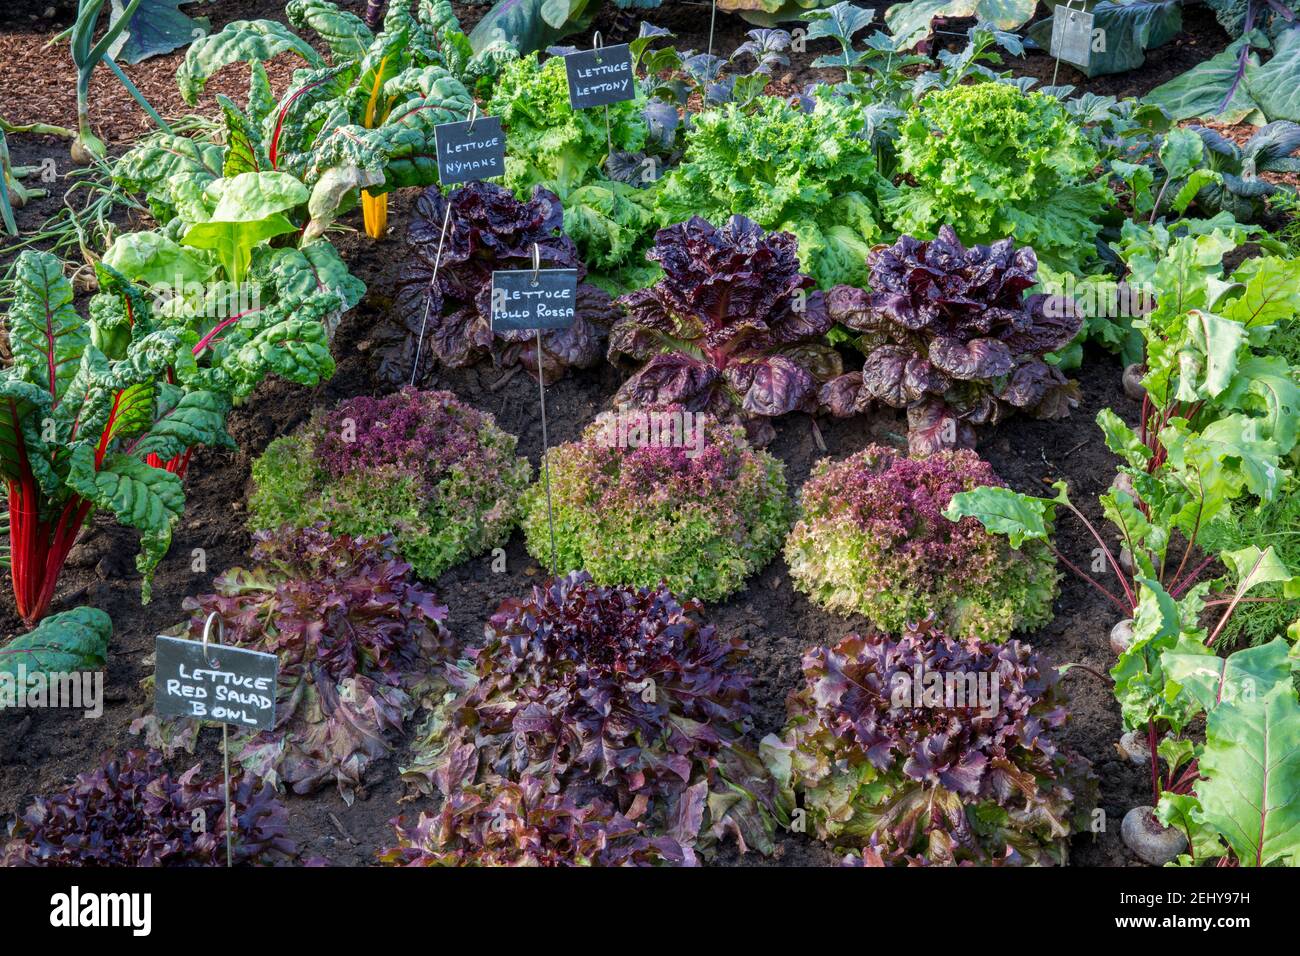 organic kitchen vegetable garden salad lettuces with plant labels growing in rows varieties include lettuce Lollo Rossa - red salad bowl - Nymans UK Stock Photo